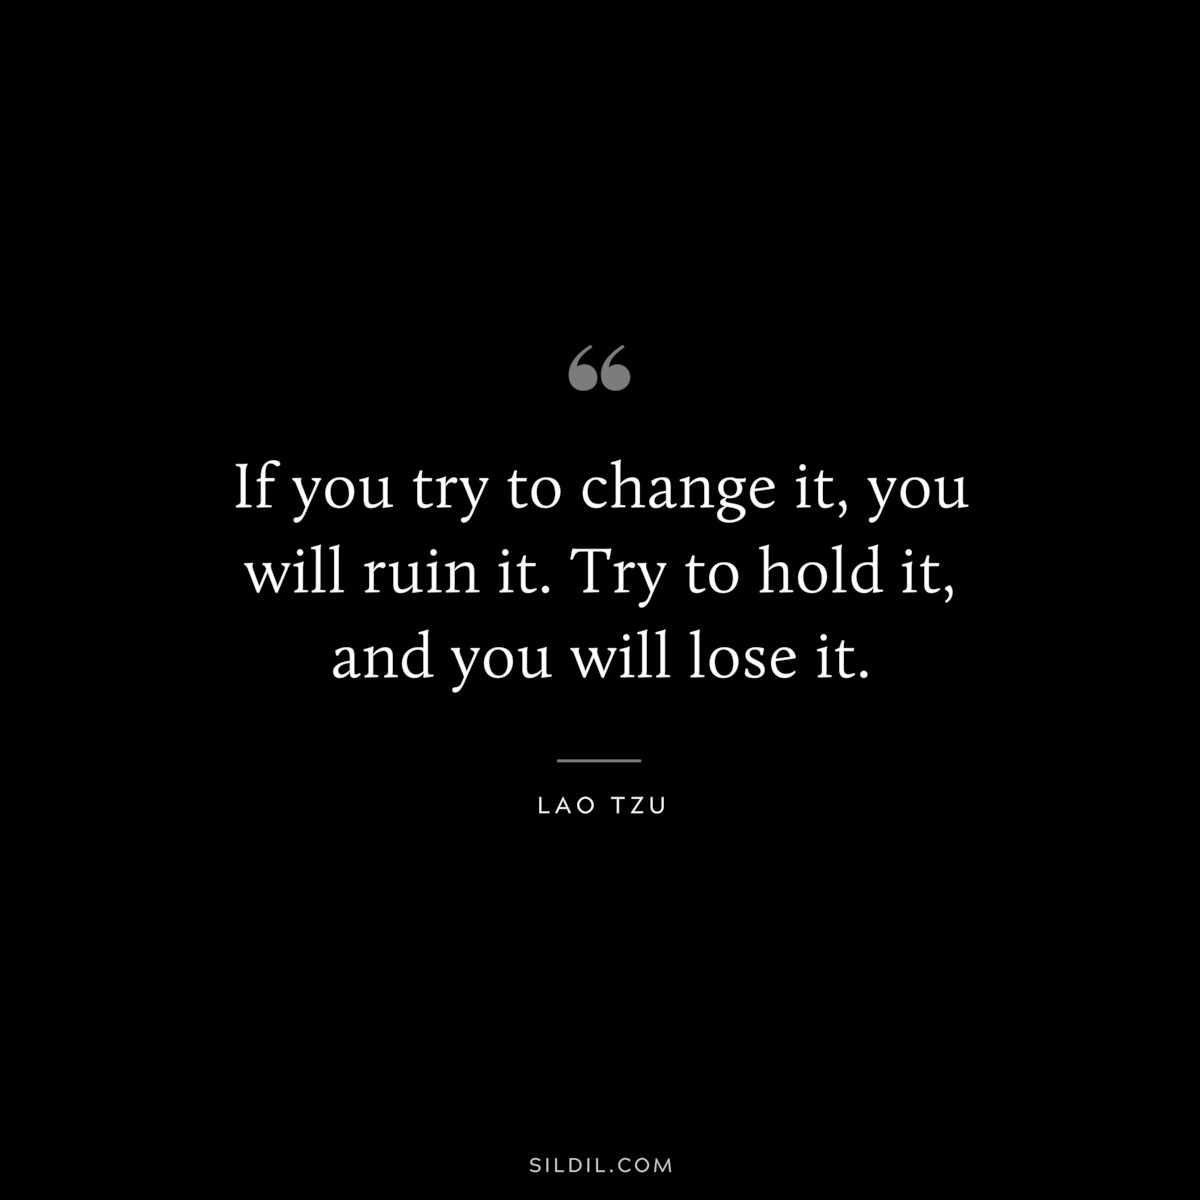 If you try to change it, you will ruin it. Try to hold it, and you will lose it. ― Lao Tzu